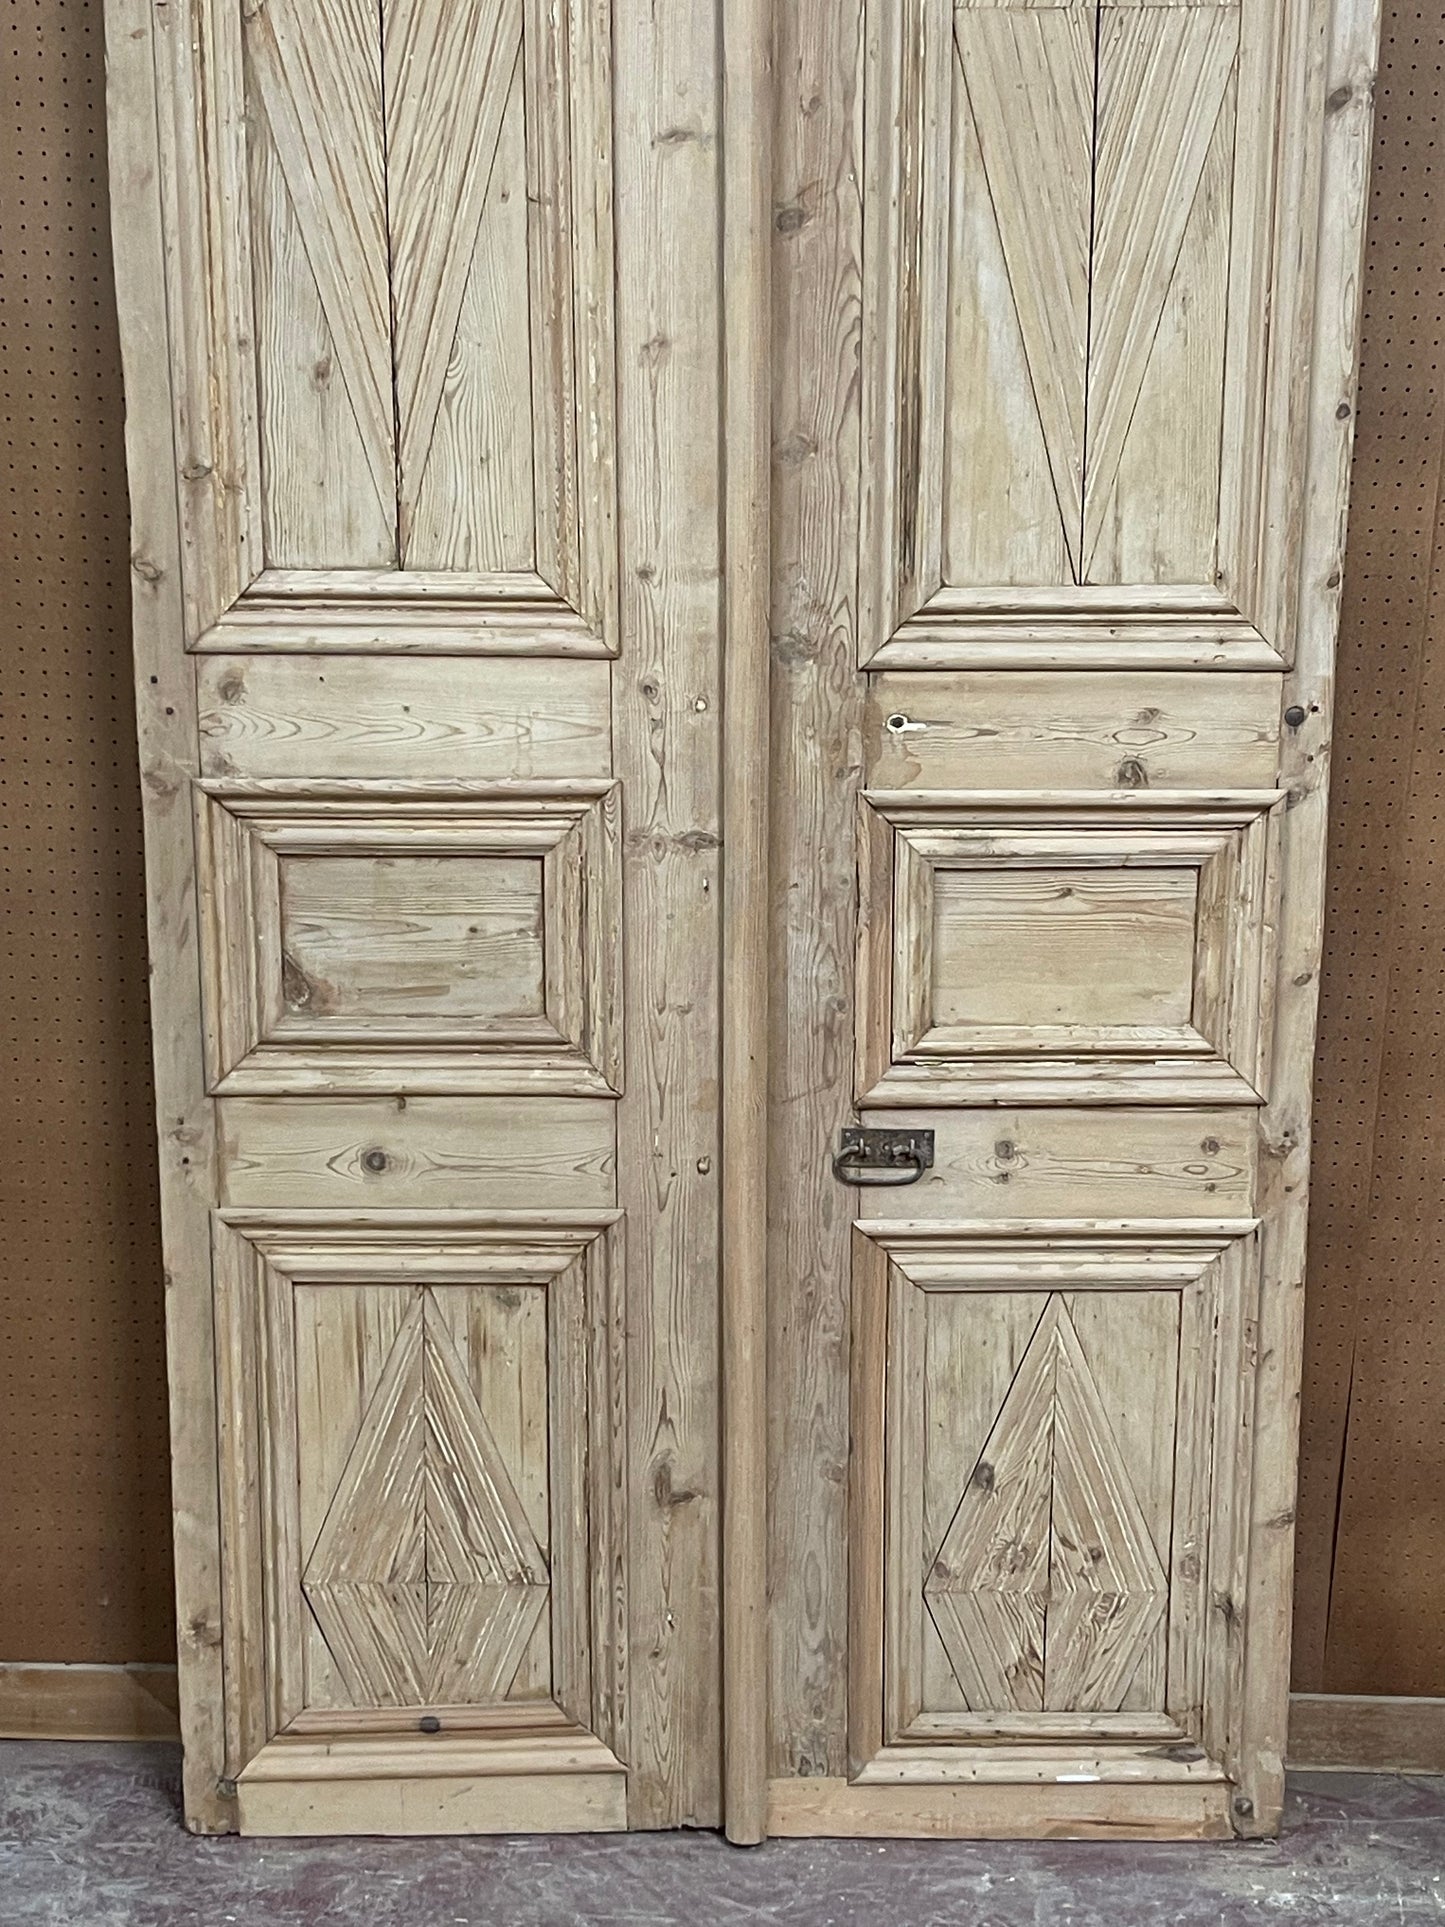 Antique  French Panel Door with Carving  (132.75x51.25)  E997